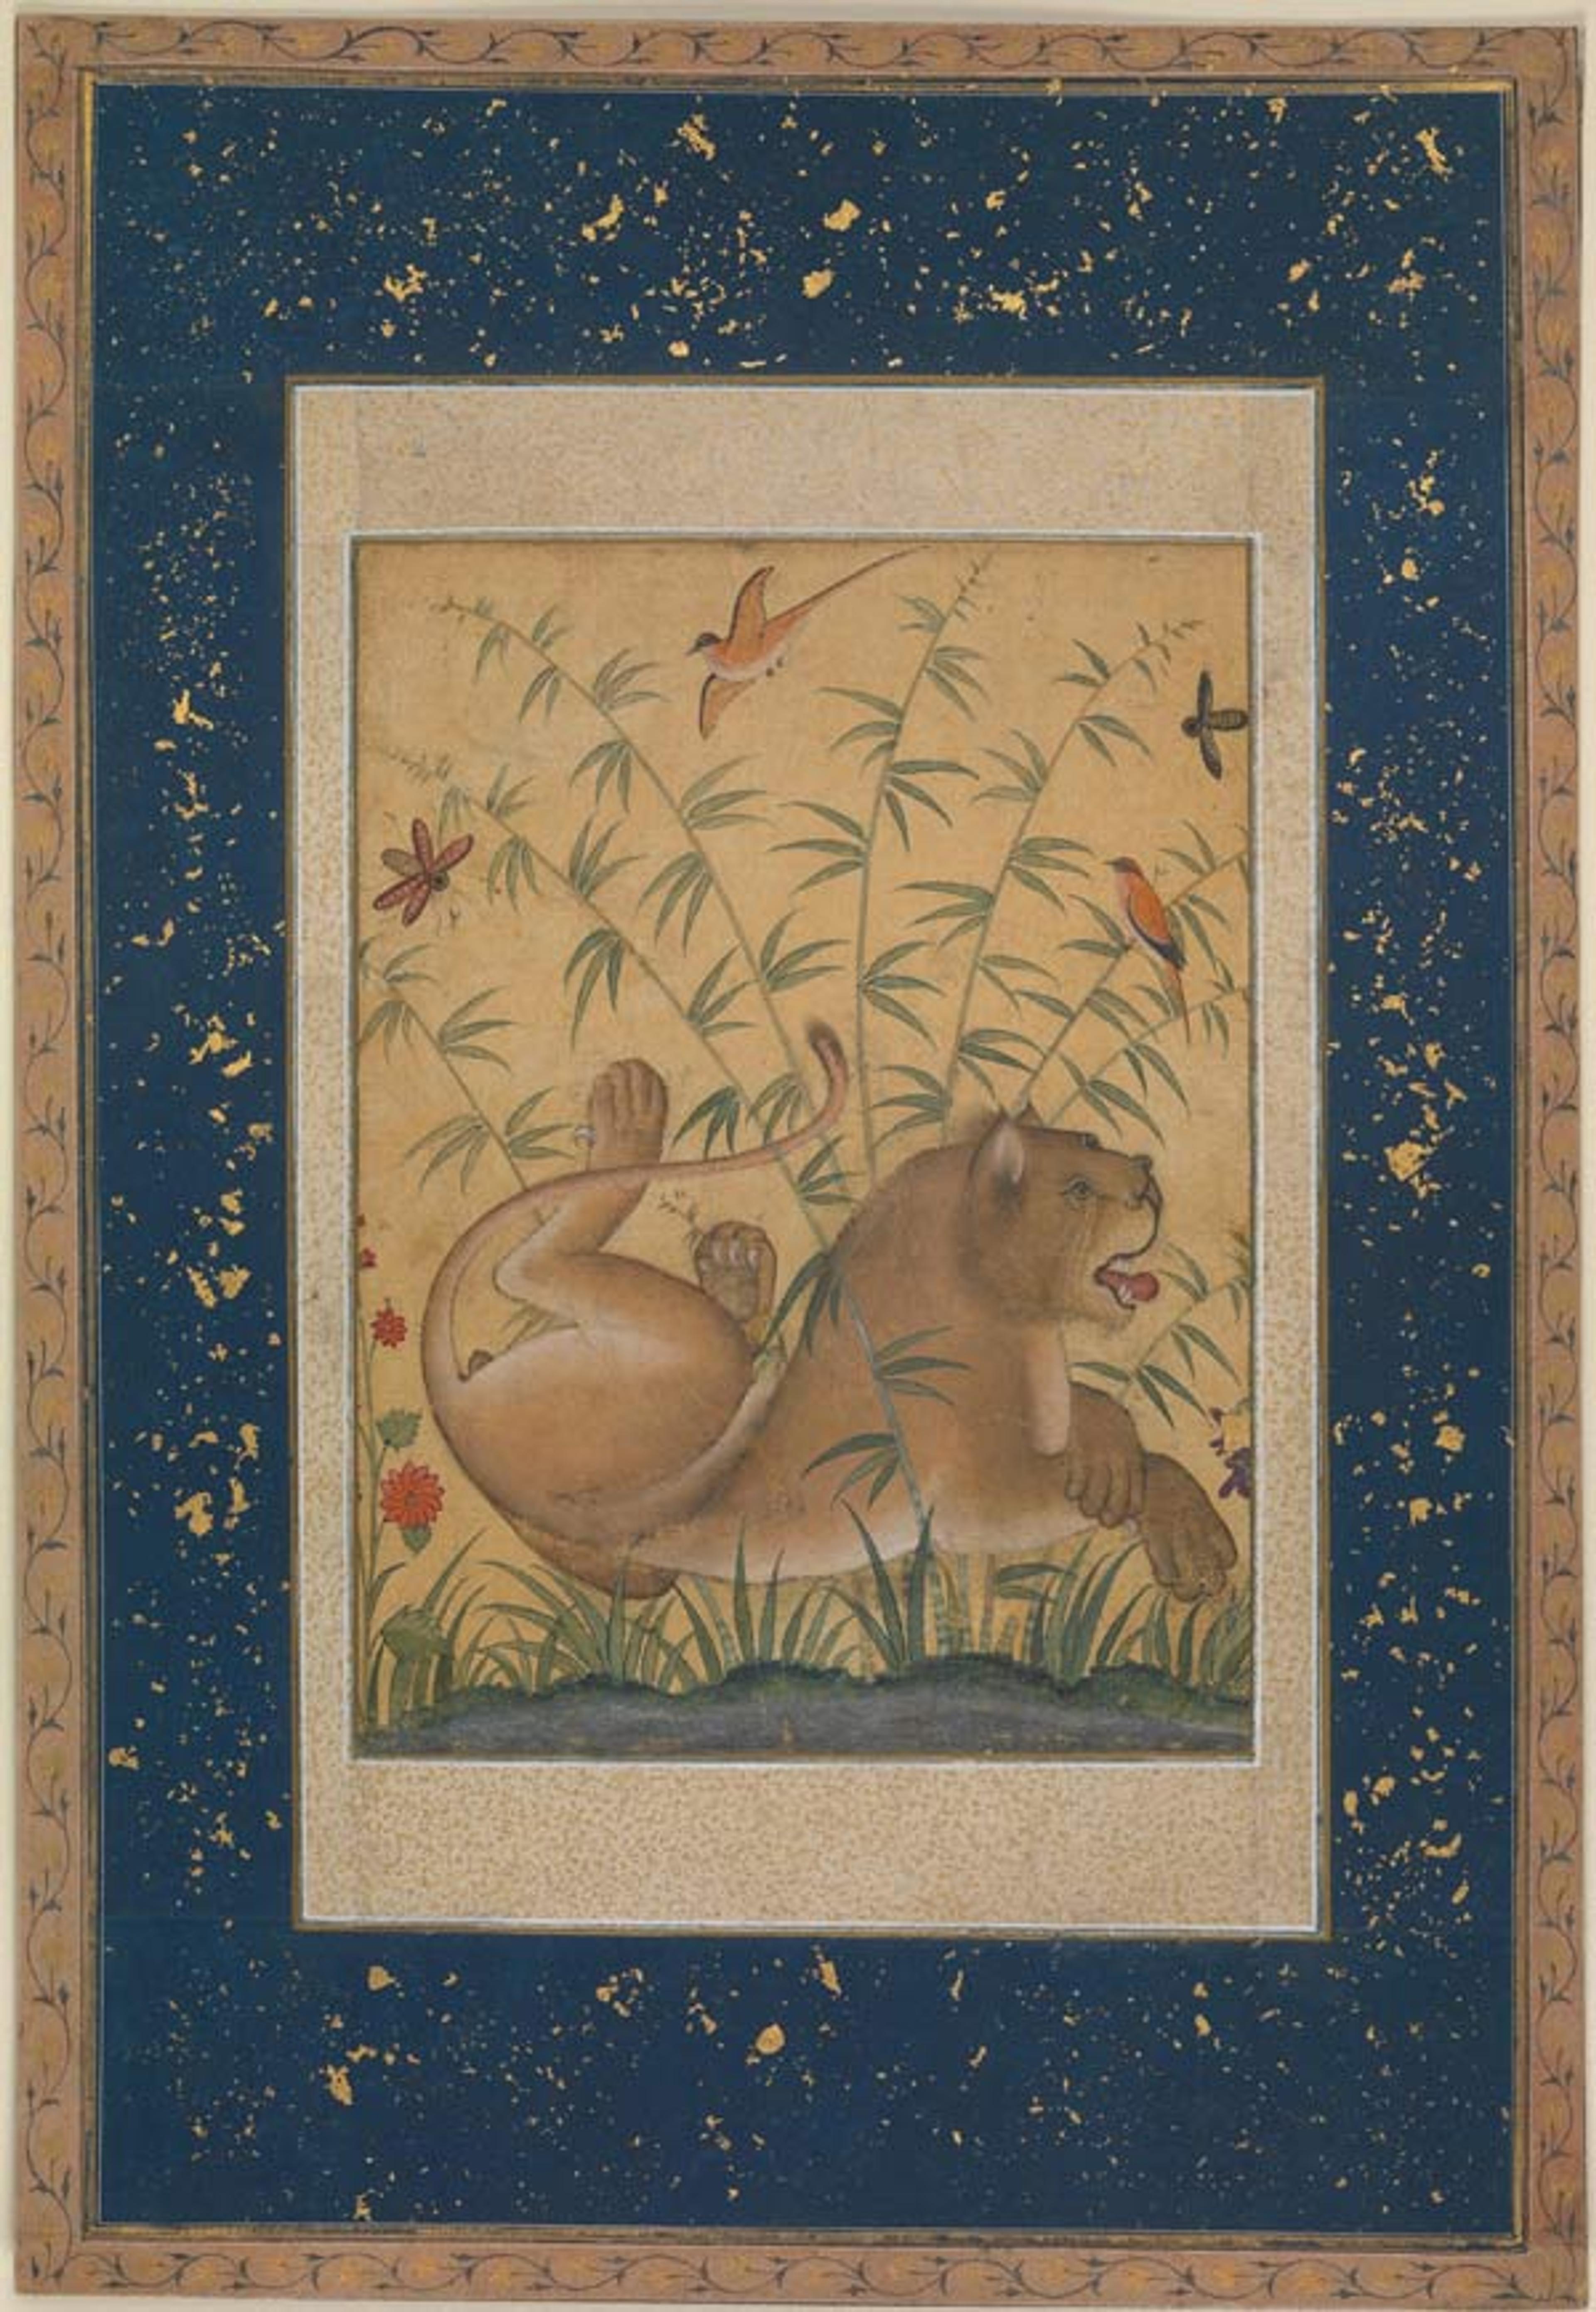 Lion at Rest, ca. 1585. India. Islamic. Ink, opaque watercolor, silver, and gold on paper; Painting: 8 x 6 in. (20.3 x 15.2 cm). The Metropolitan Museum of Art, New York, The Alice and Nasli Heeramaneck Collection, Gift of Alice Heeramaneck, 1985 (1985.221)